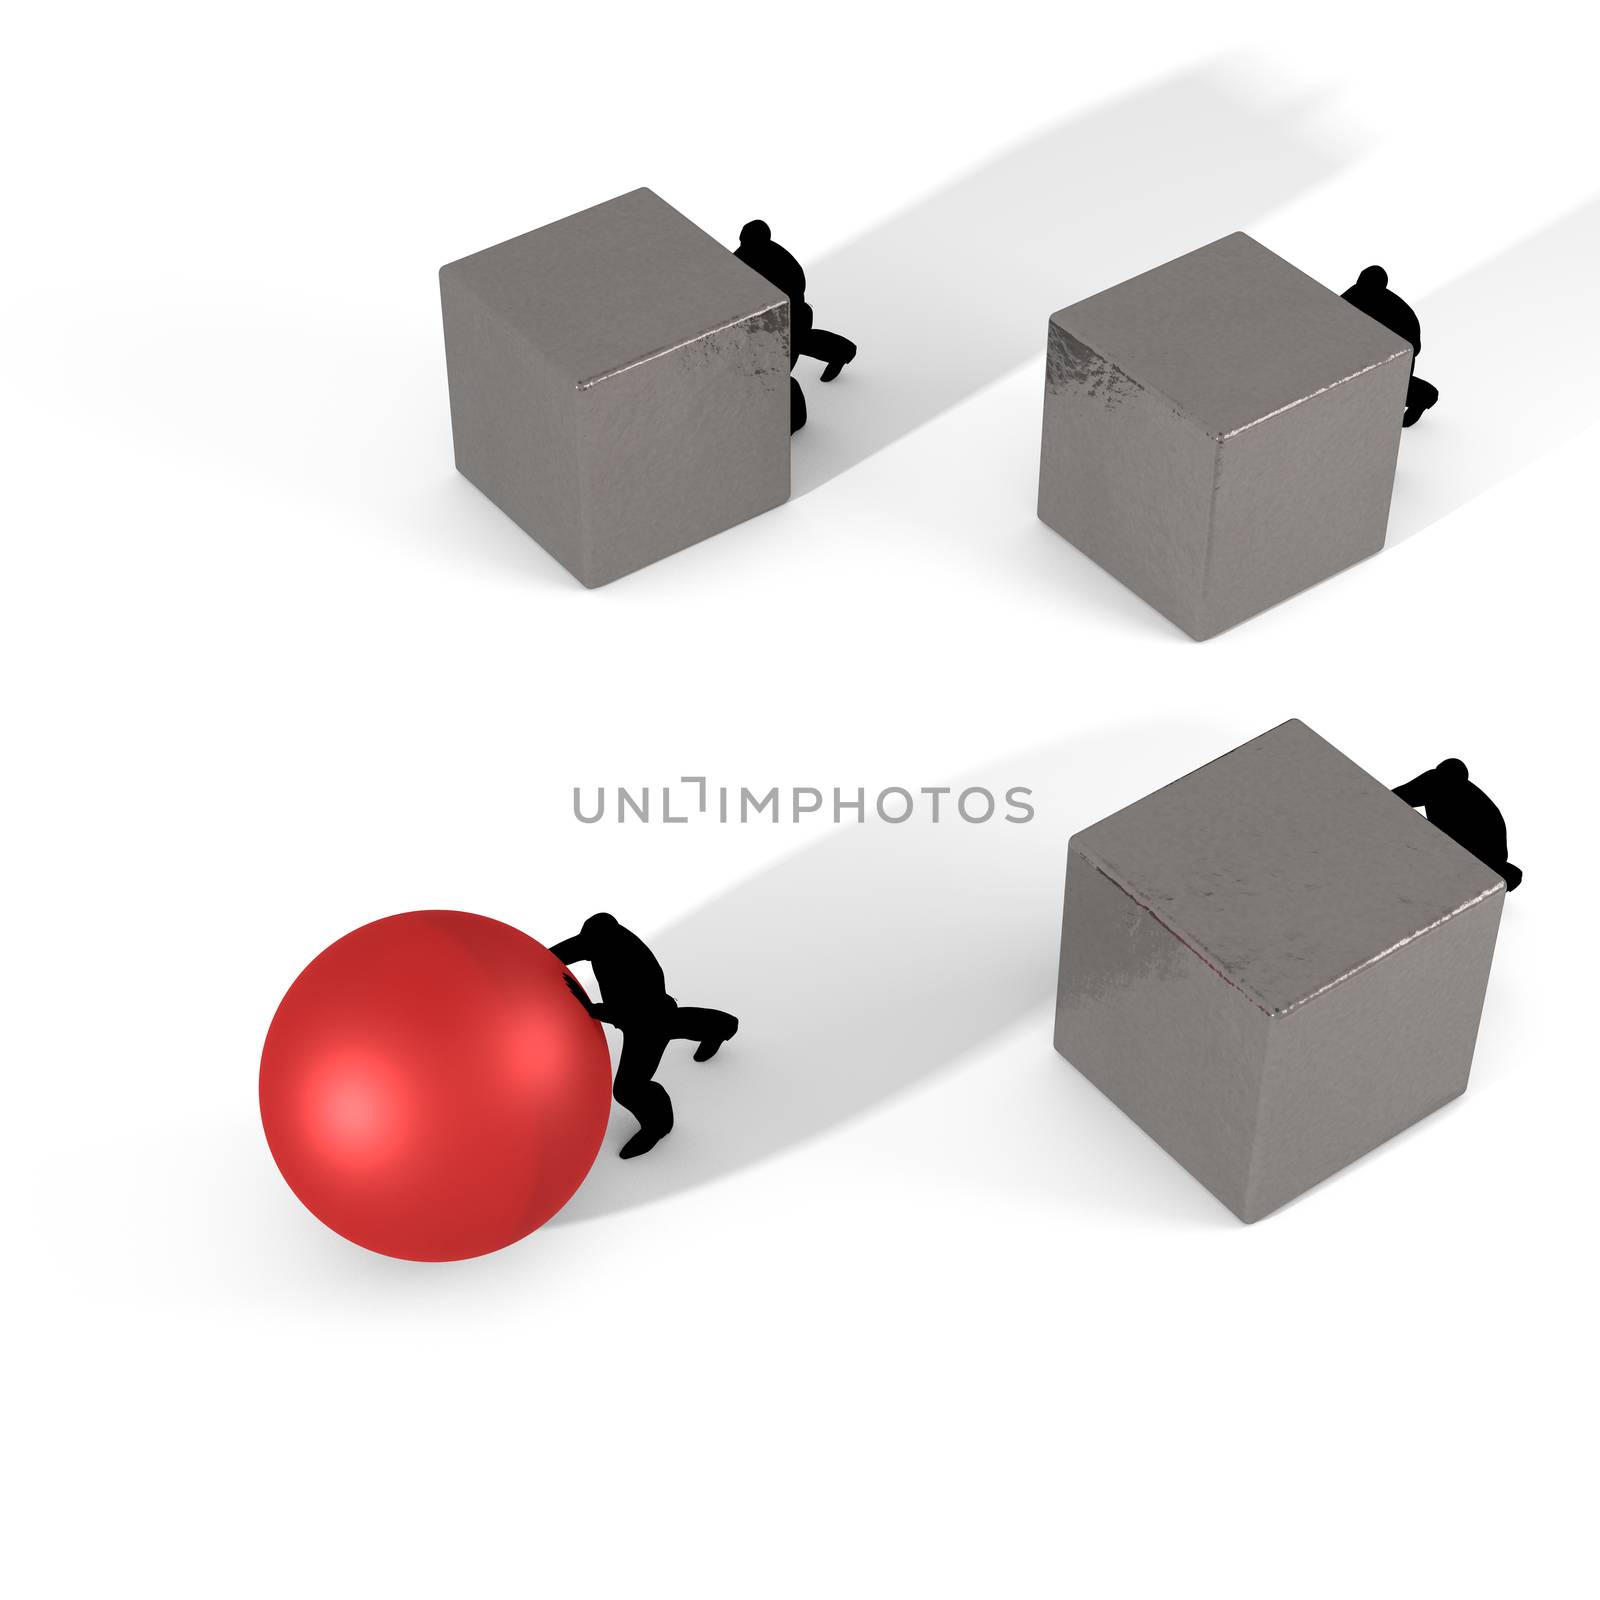 Concept illustration showing different strategies to achieve the same goal.